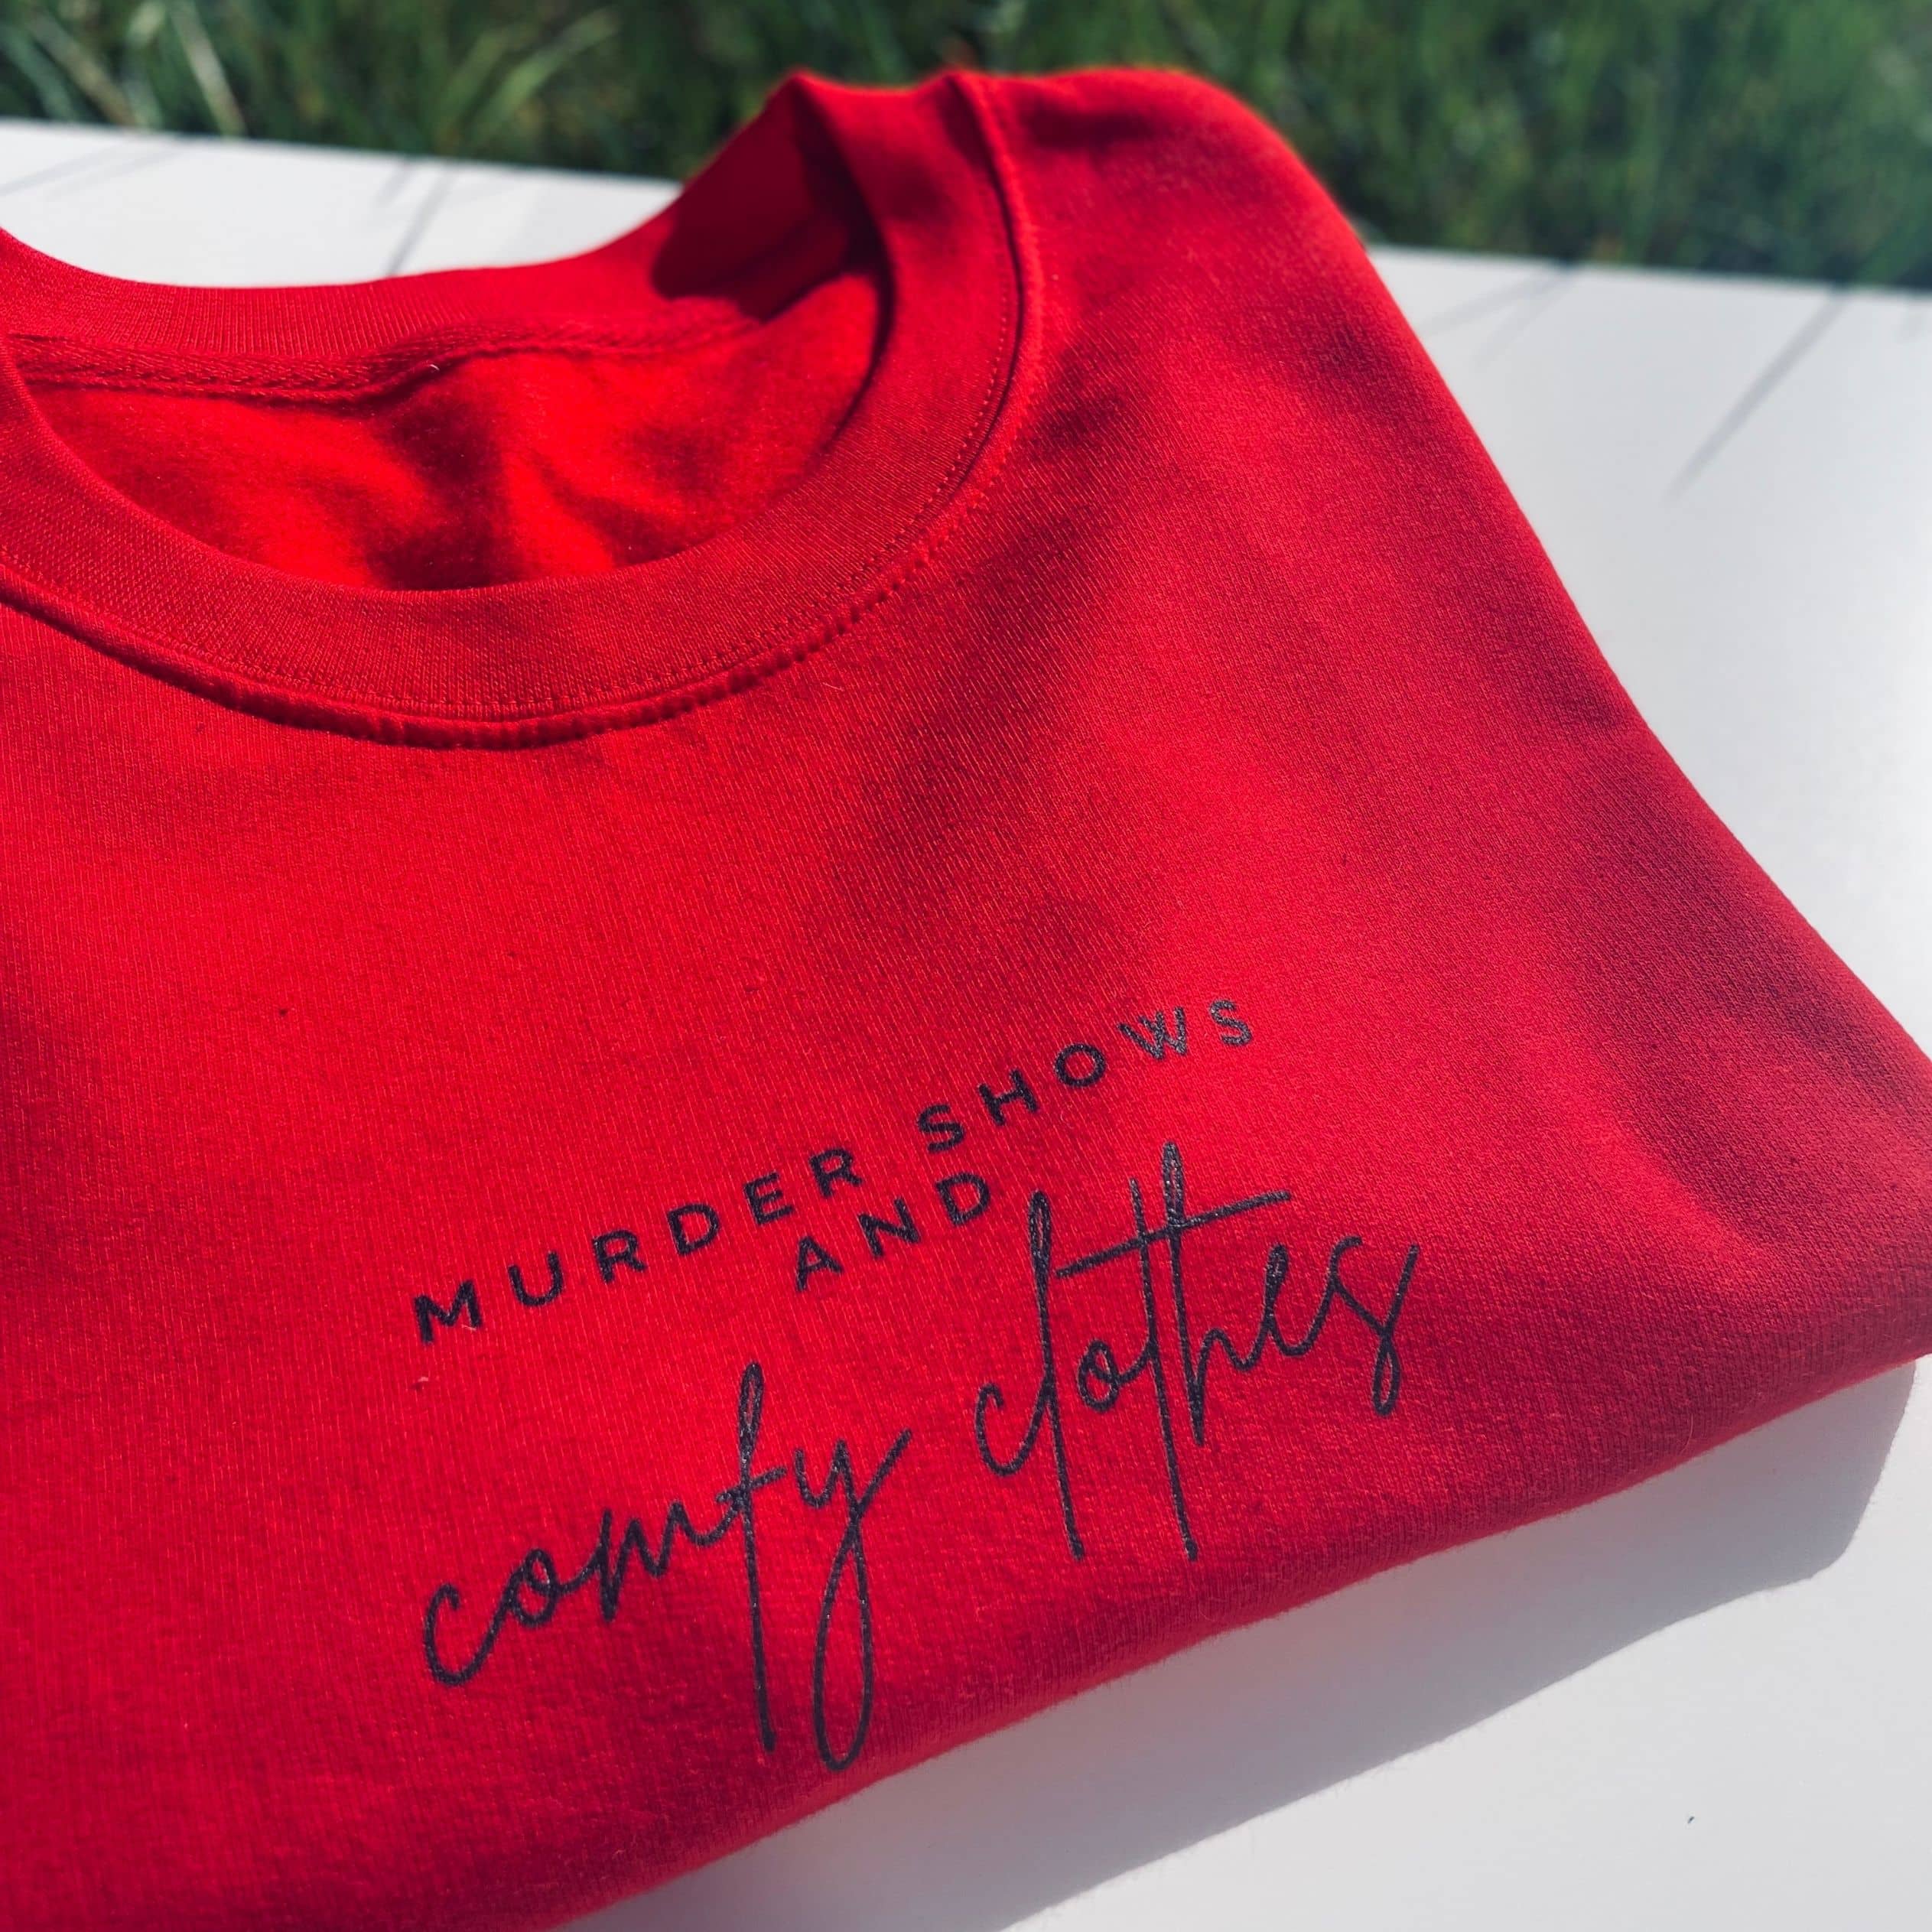 Sweatshirt that says: Murder shows and comfy clothes. Murder shows is in caps and sans serif style font, comfy clothes is in a handwritten style font. Text is small and placed in the centre of the chest, stretching as far as the neckline